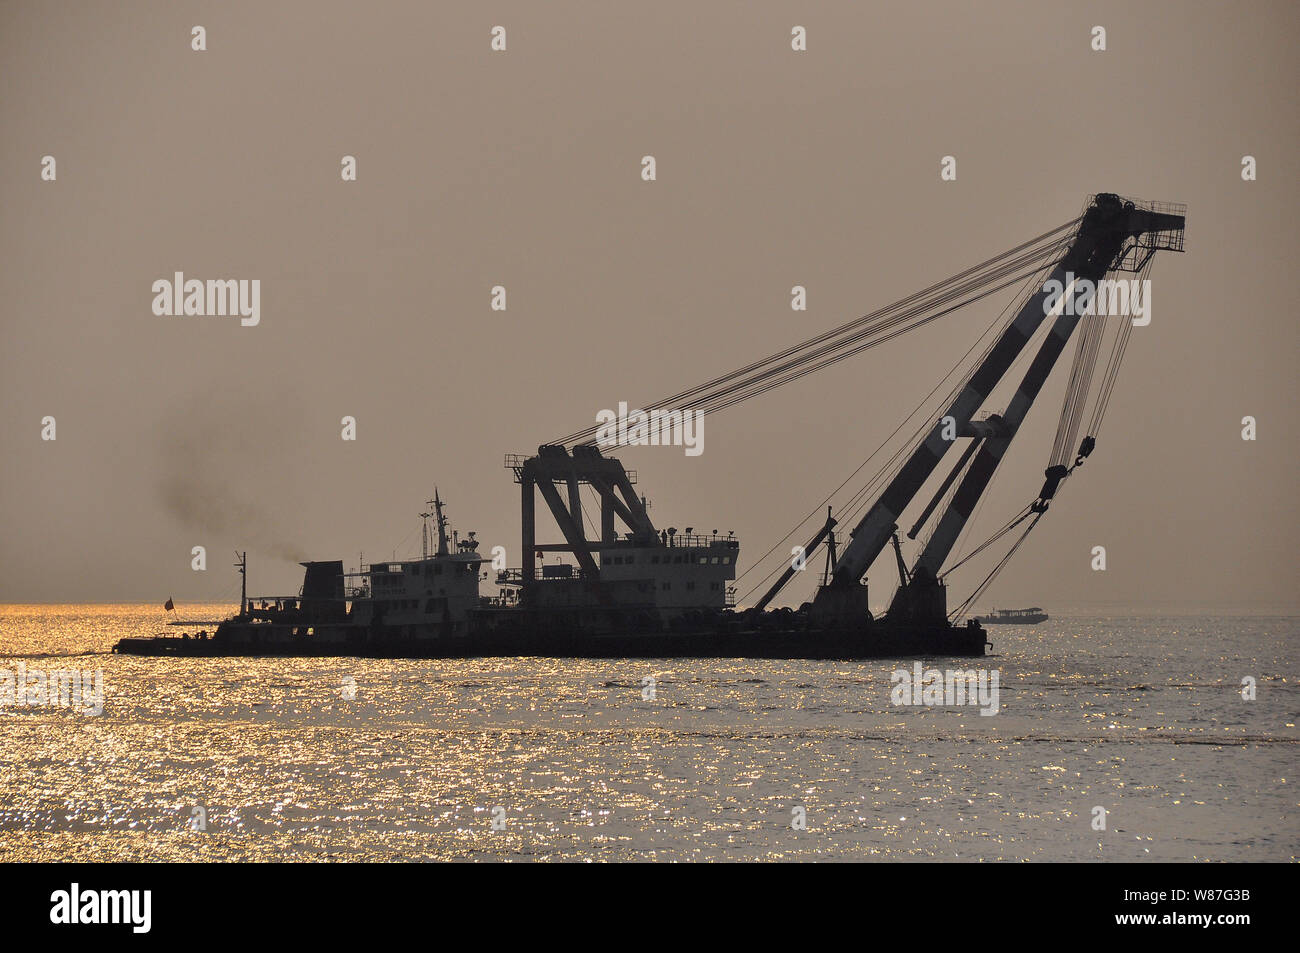 a crane barge used in shipbuilding on the Yangtse river in Nantong, China Stock Photo